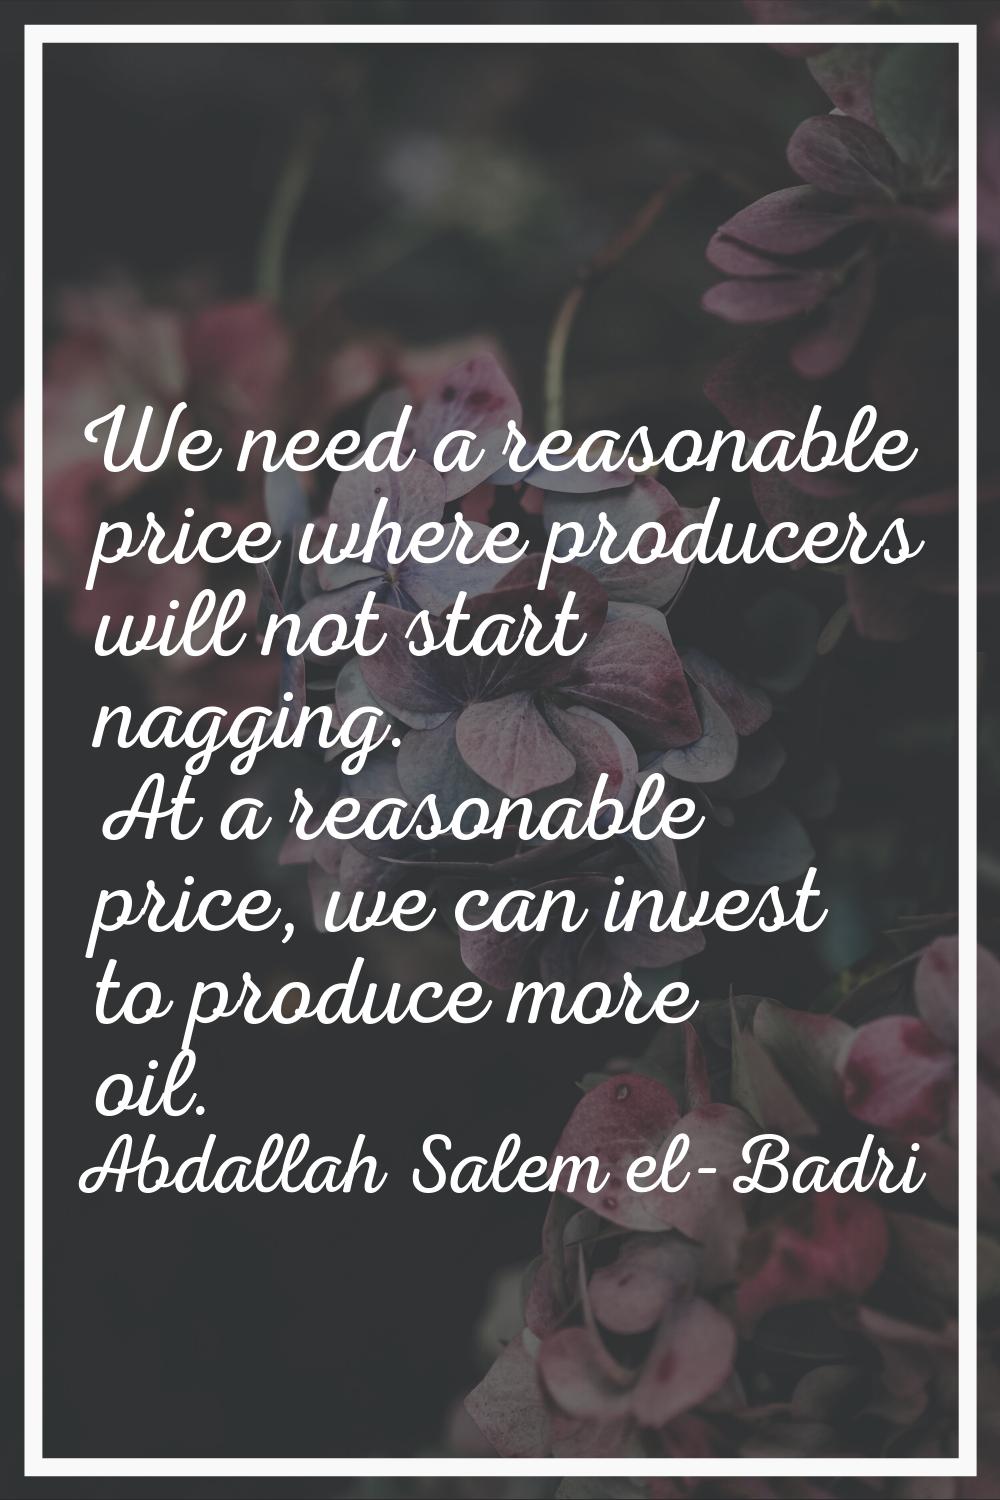 We need a reasonable price where producers will not start nagging. At a reasonable price, we can in